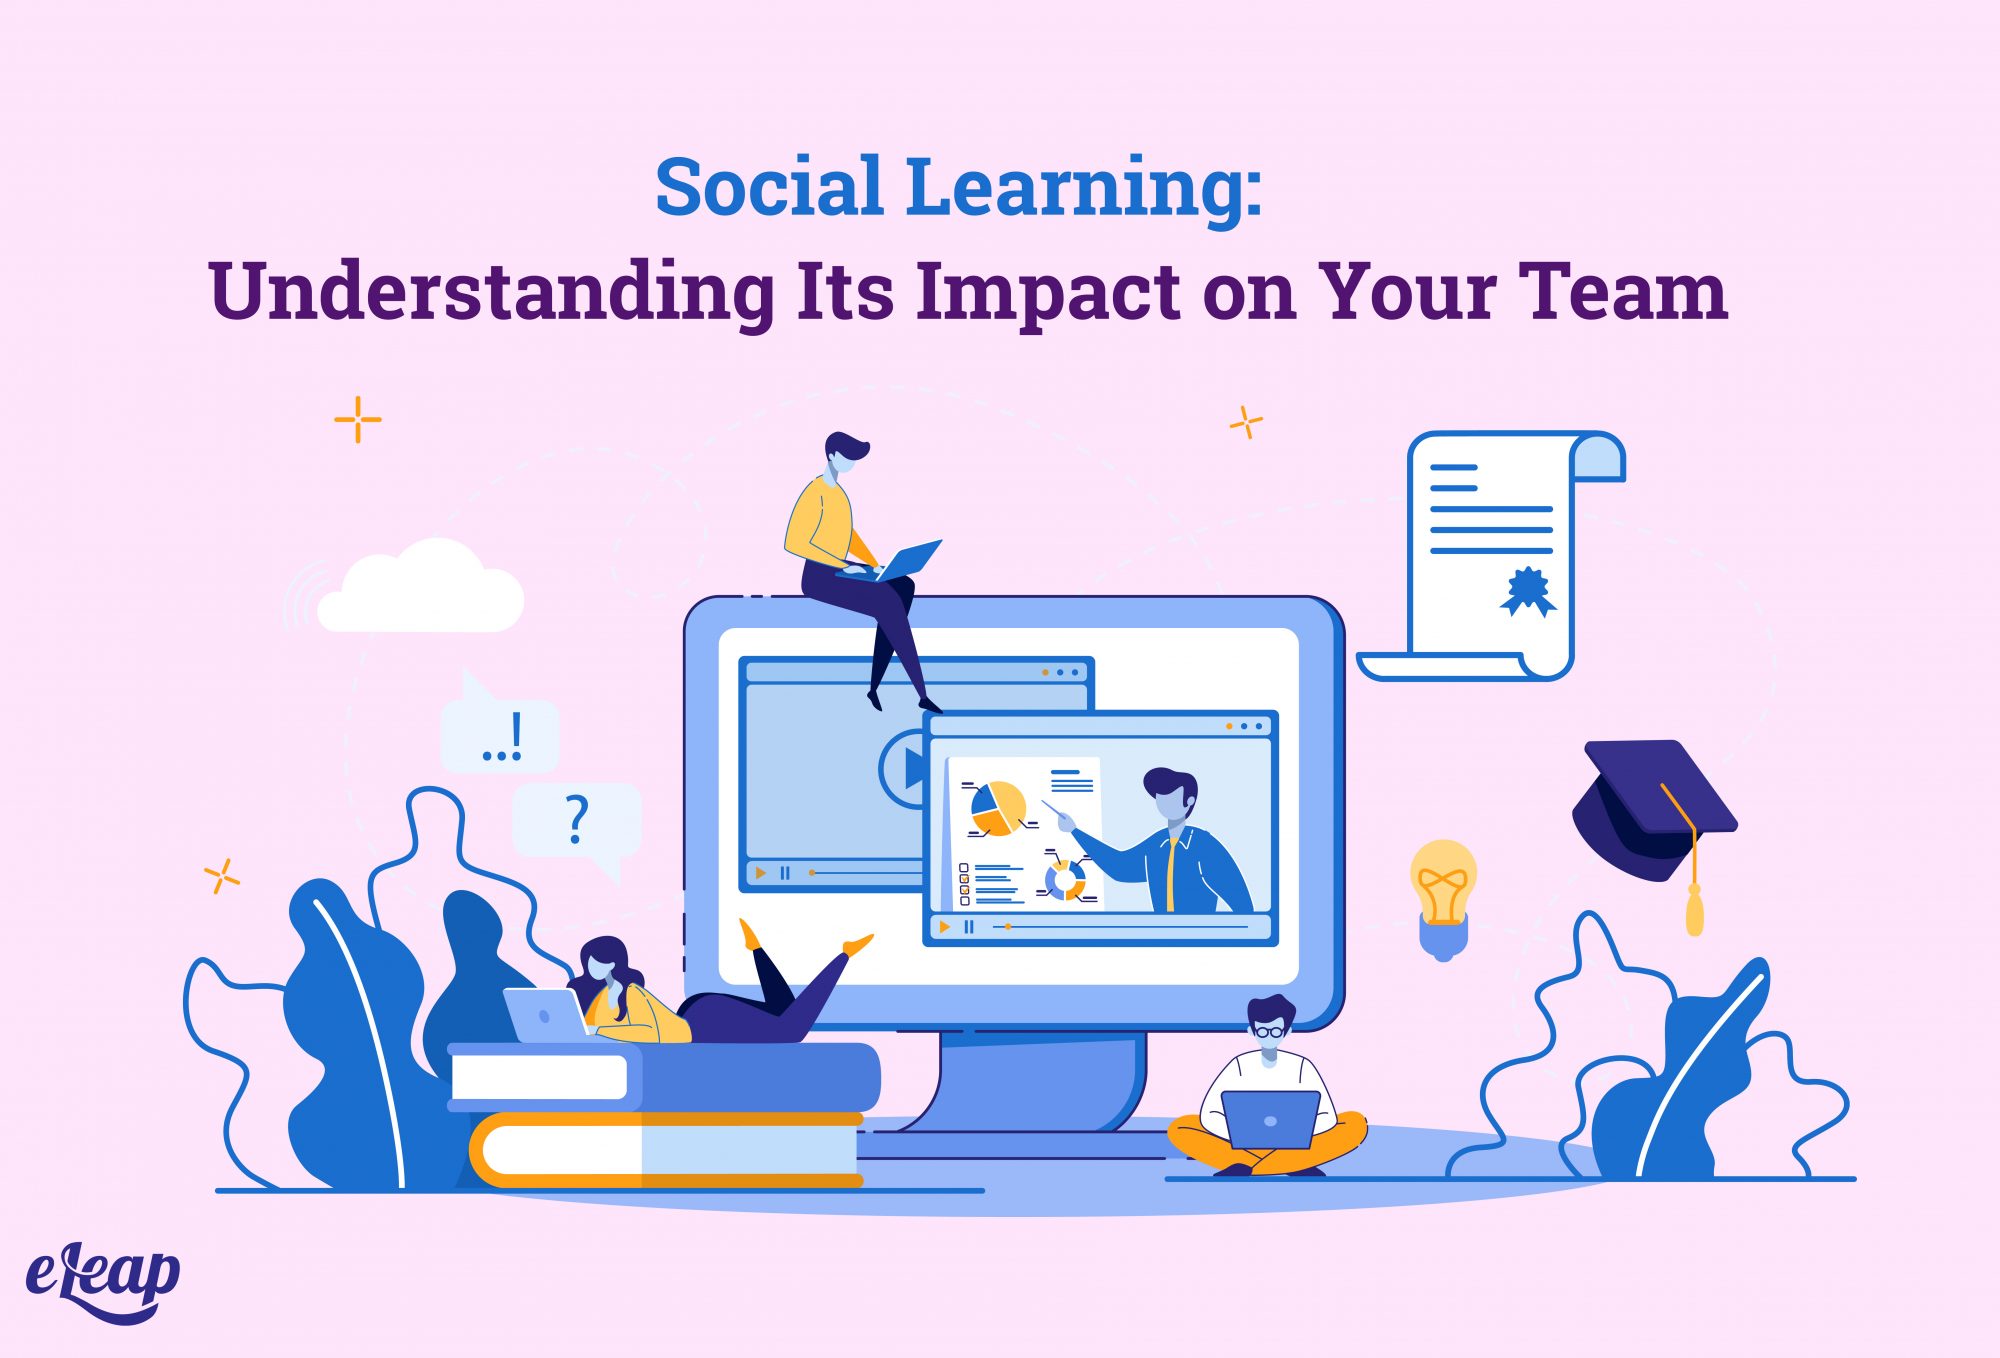 Social Learning: Understanding Its Impact on Your Team